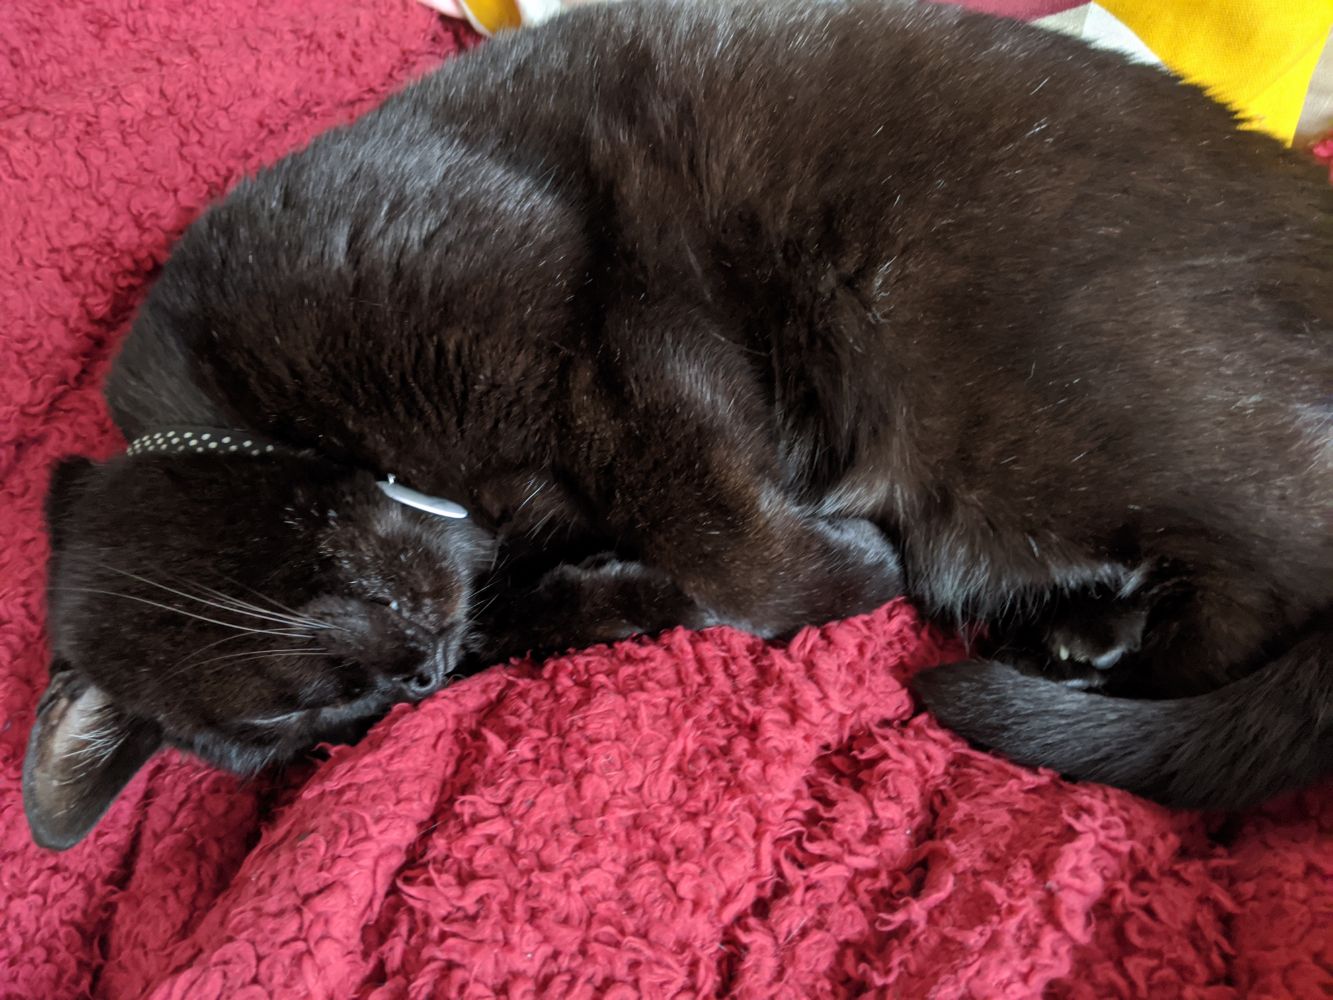 Black cat lying asleep on a red blanket, with his paws curled into him, and a hint of a tooth